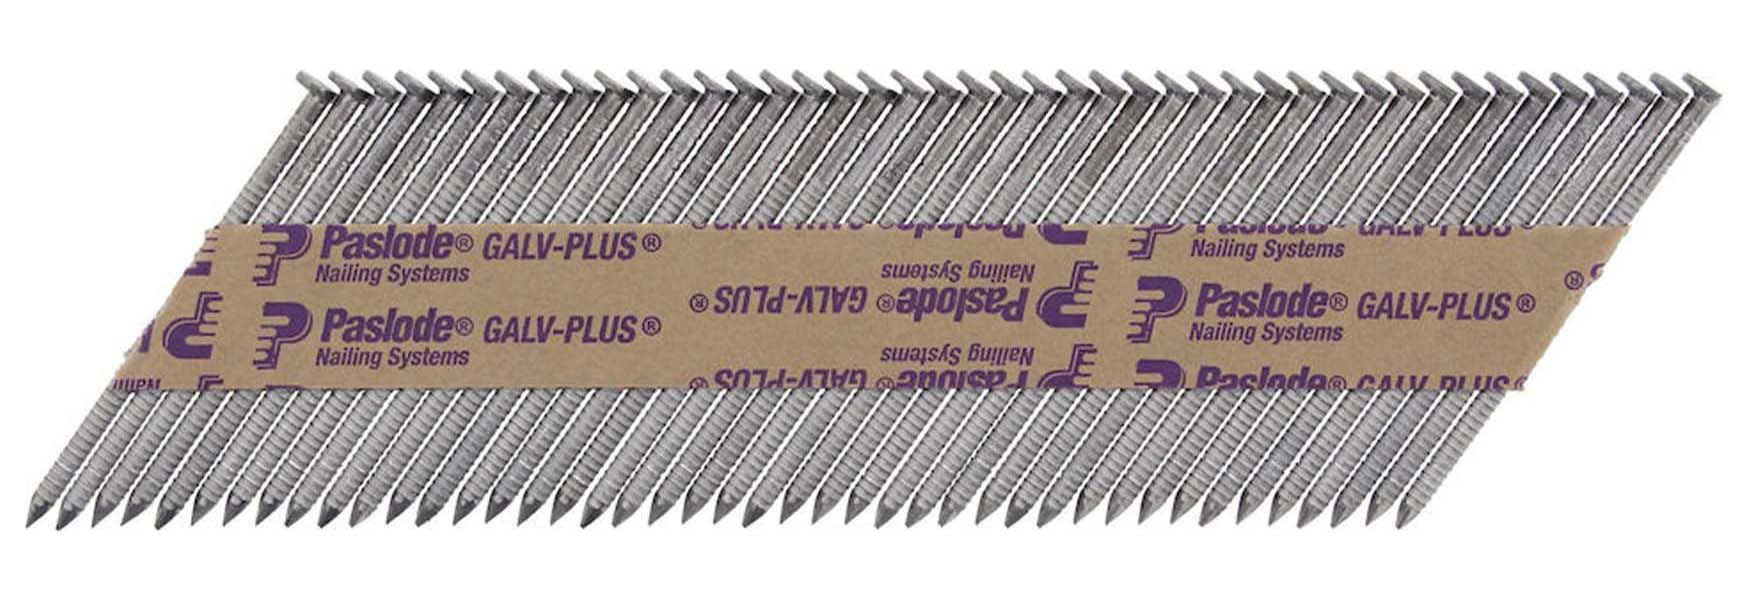 Paslode IM350 2.8mm x 51mm Galv-Plus Collated Box of 1100 Nails + 1 Fuel Cell